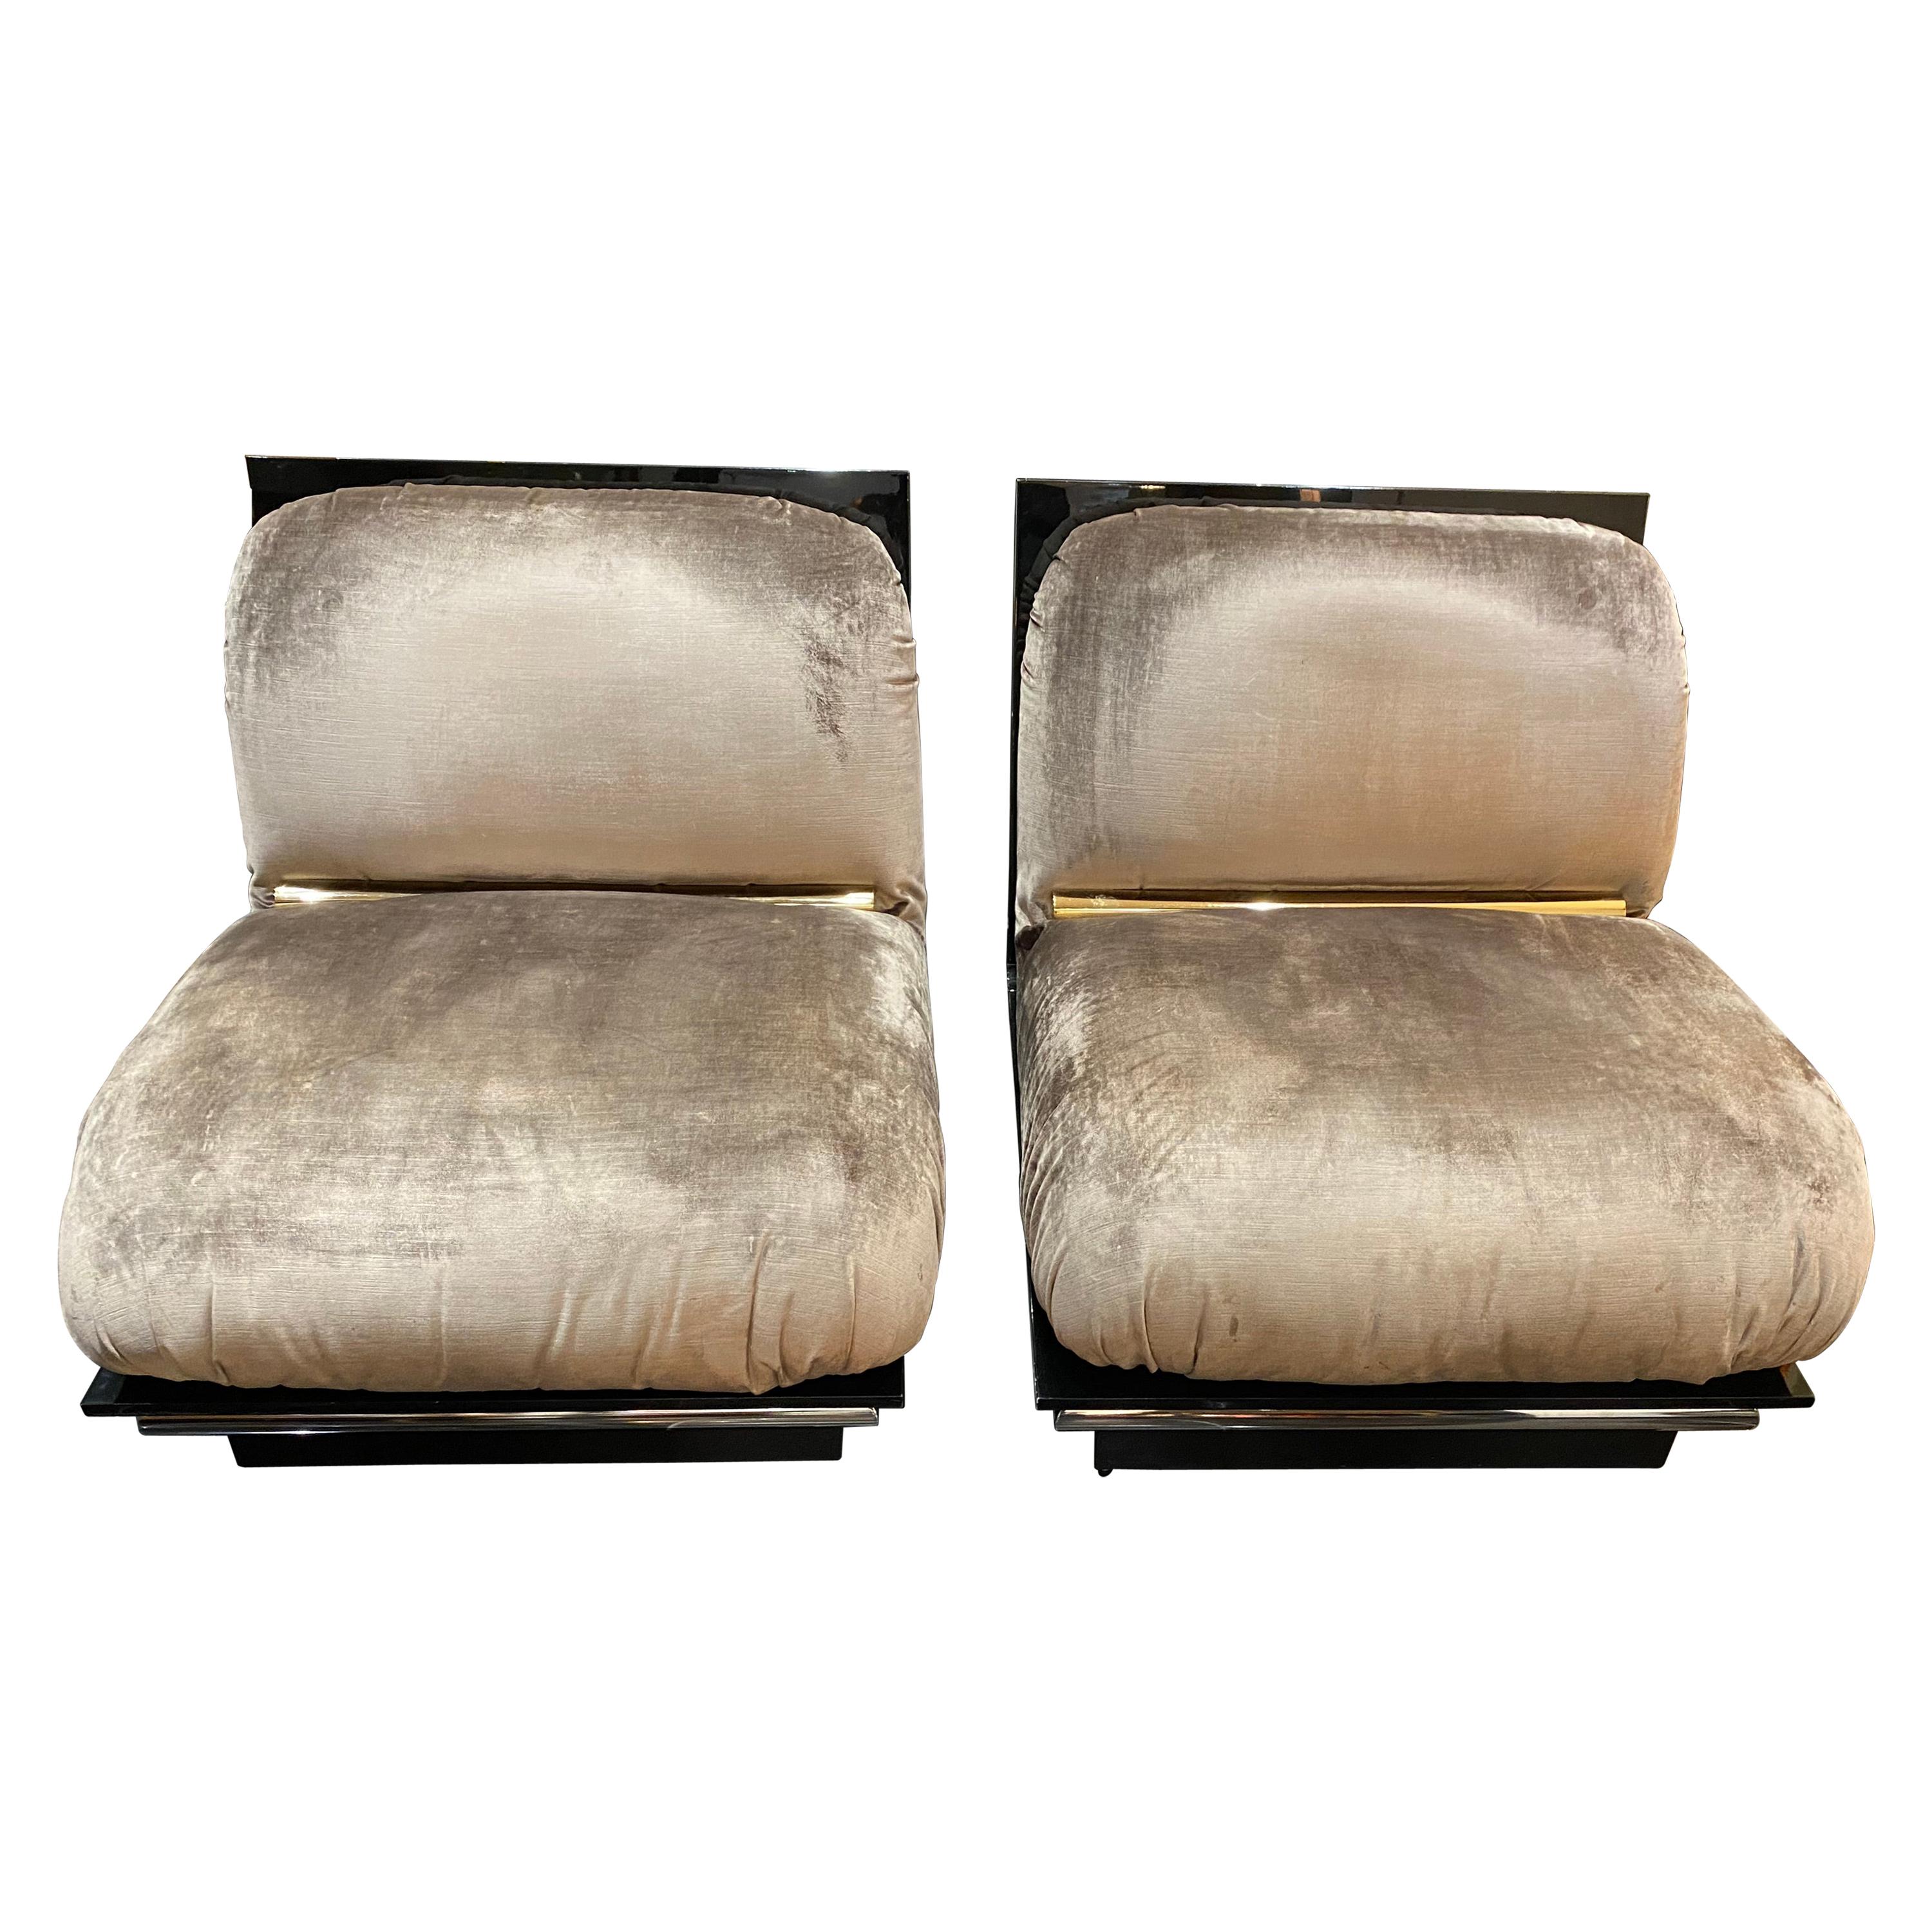 A totally unique large pair of lounge chairs with two centimetre thick solid lucite frame and fabulous bi-metal detailing covered in its original silk velvet.